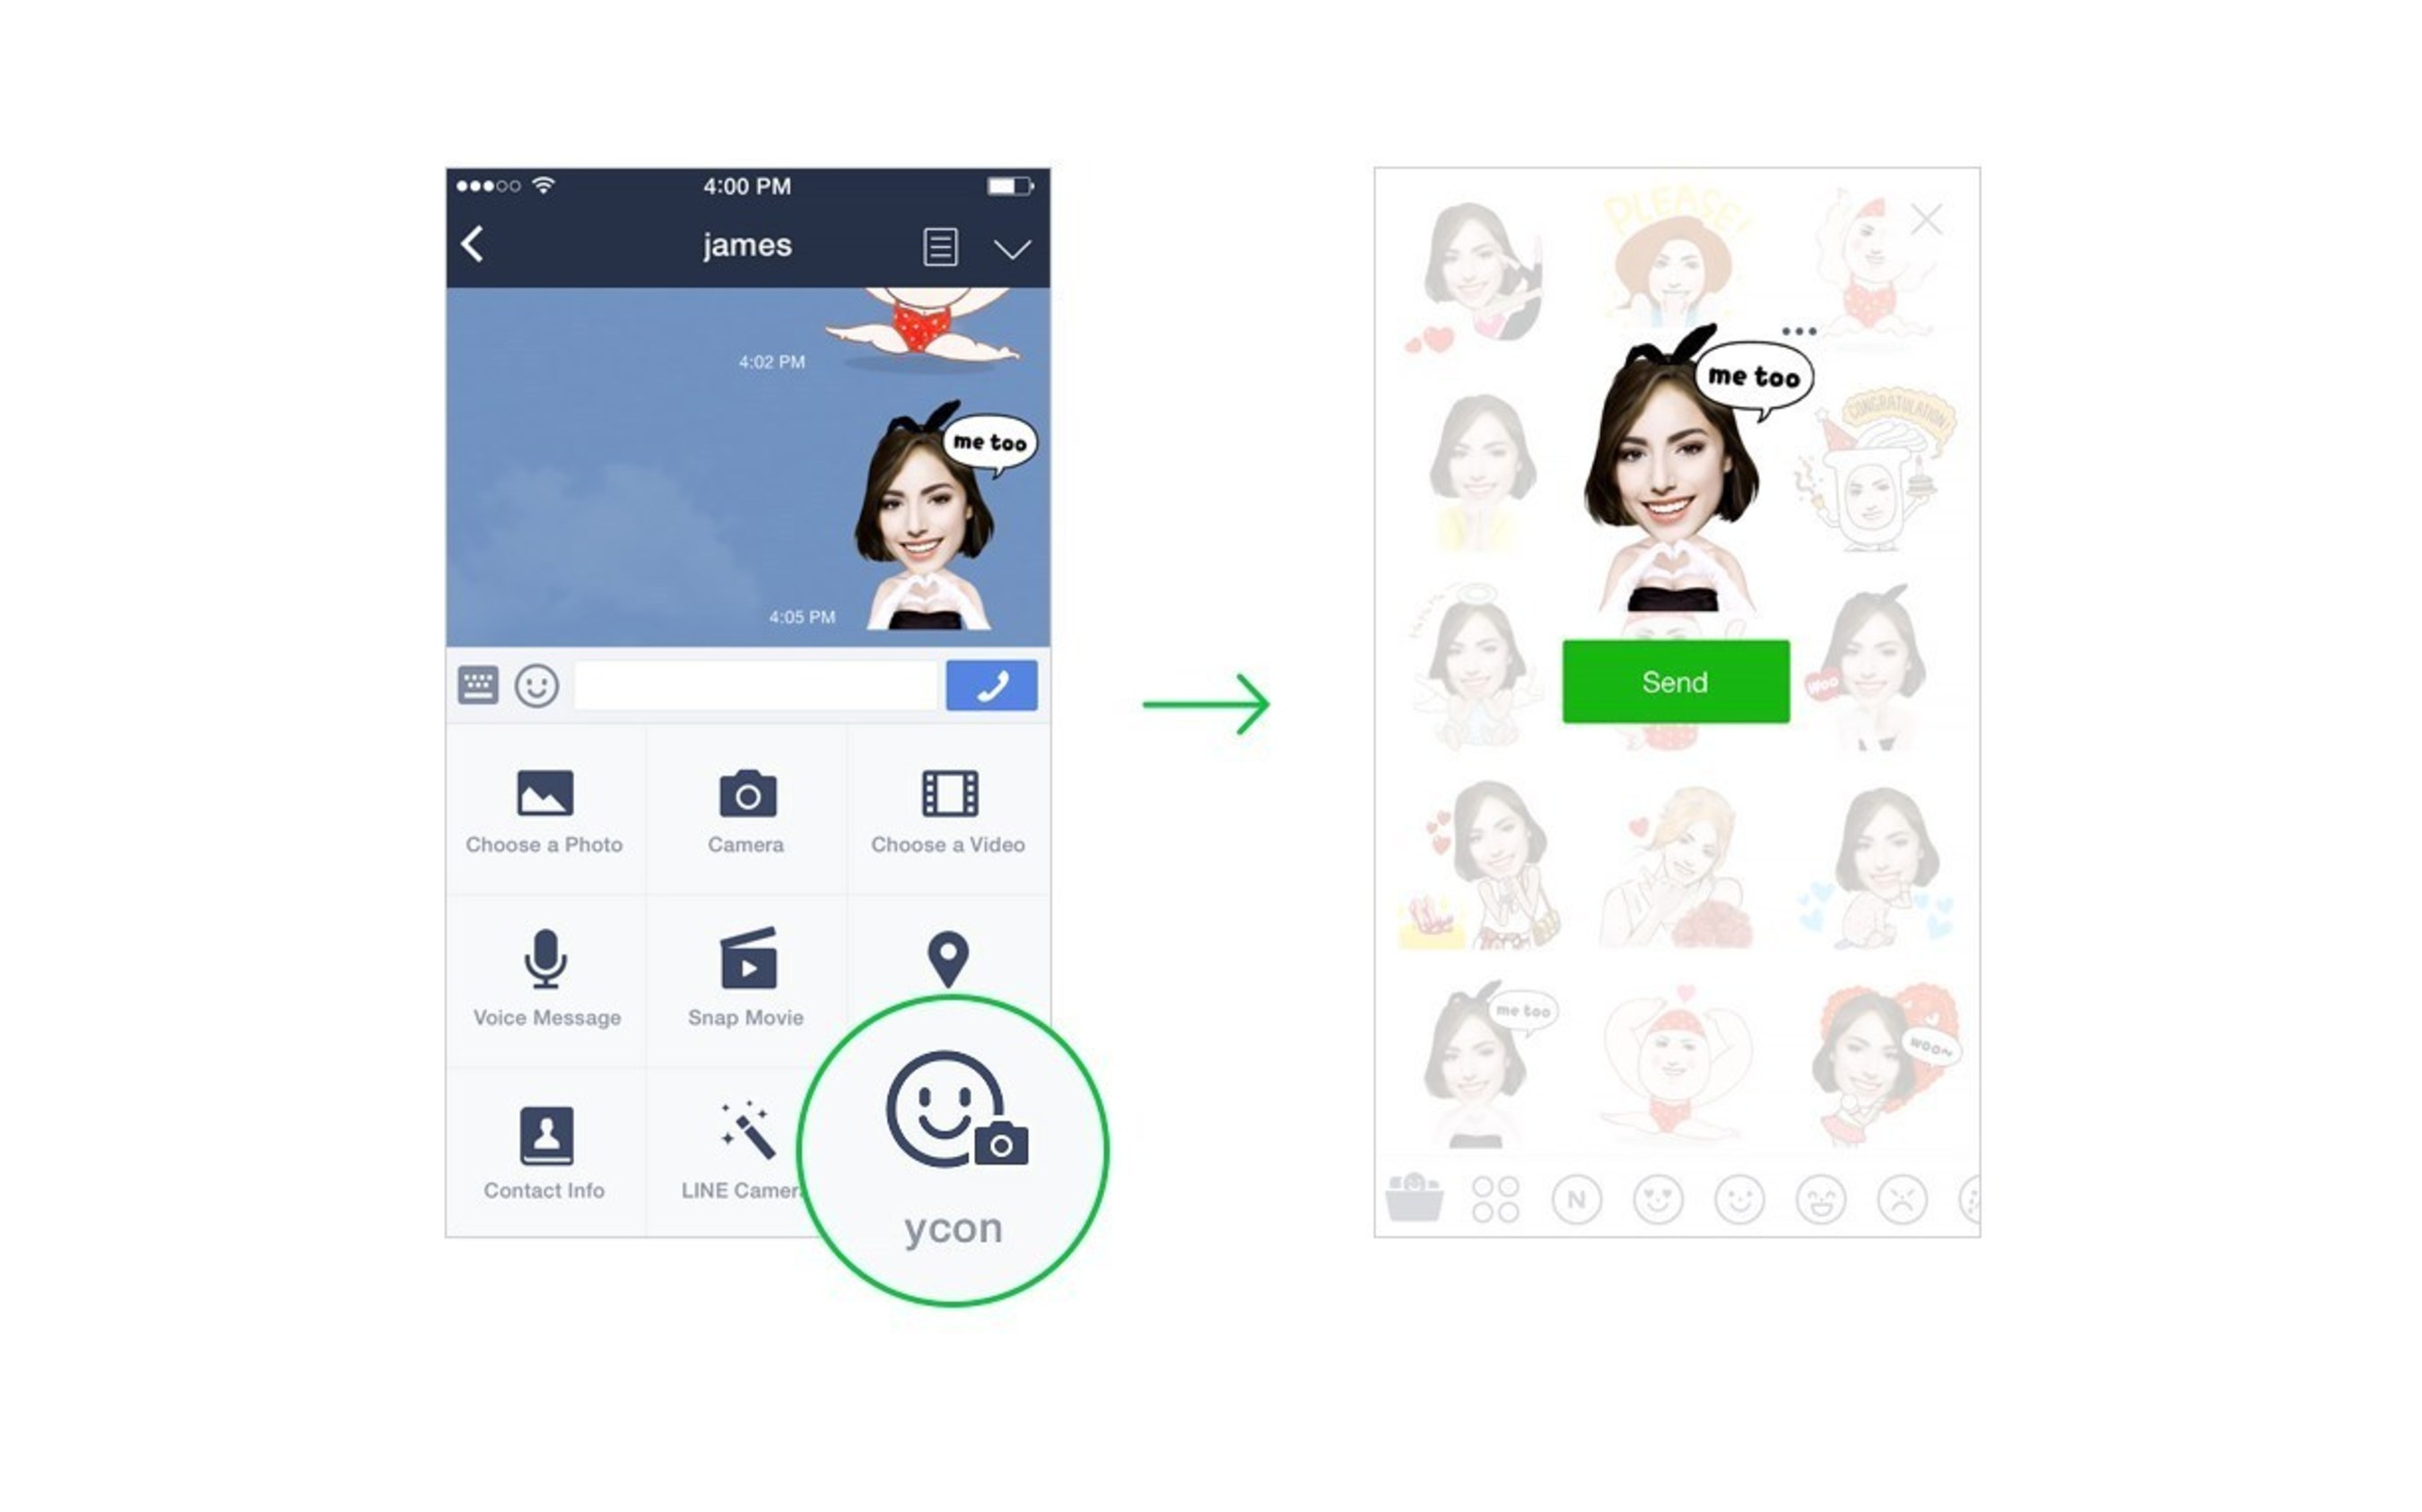 Access created stickers from LINE chats